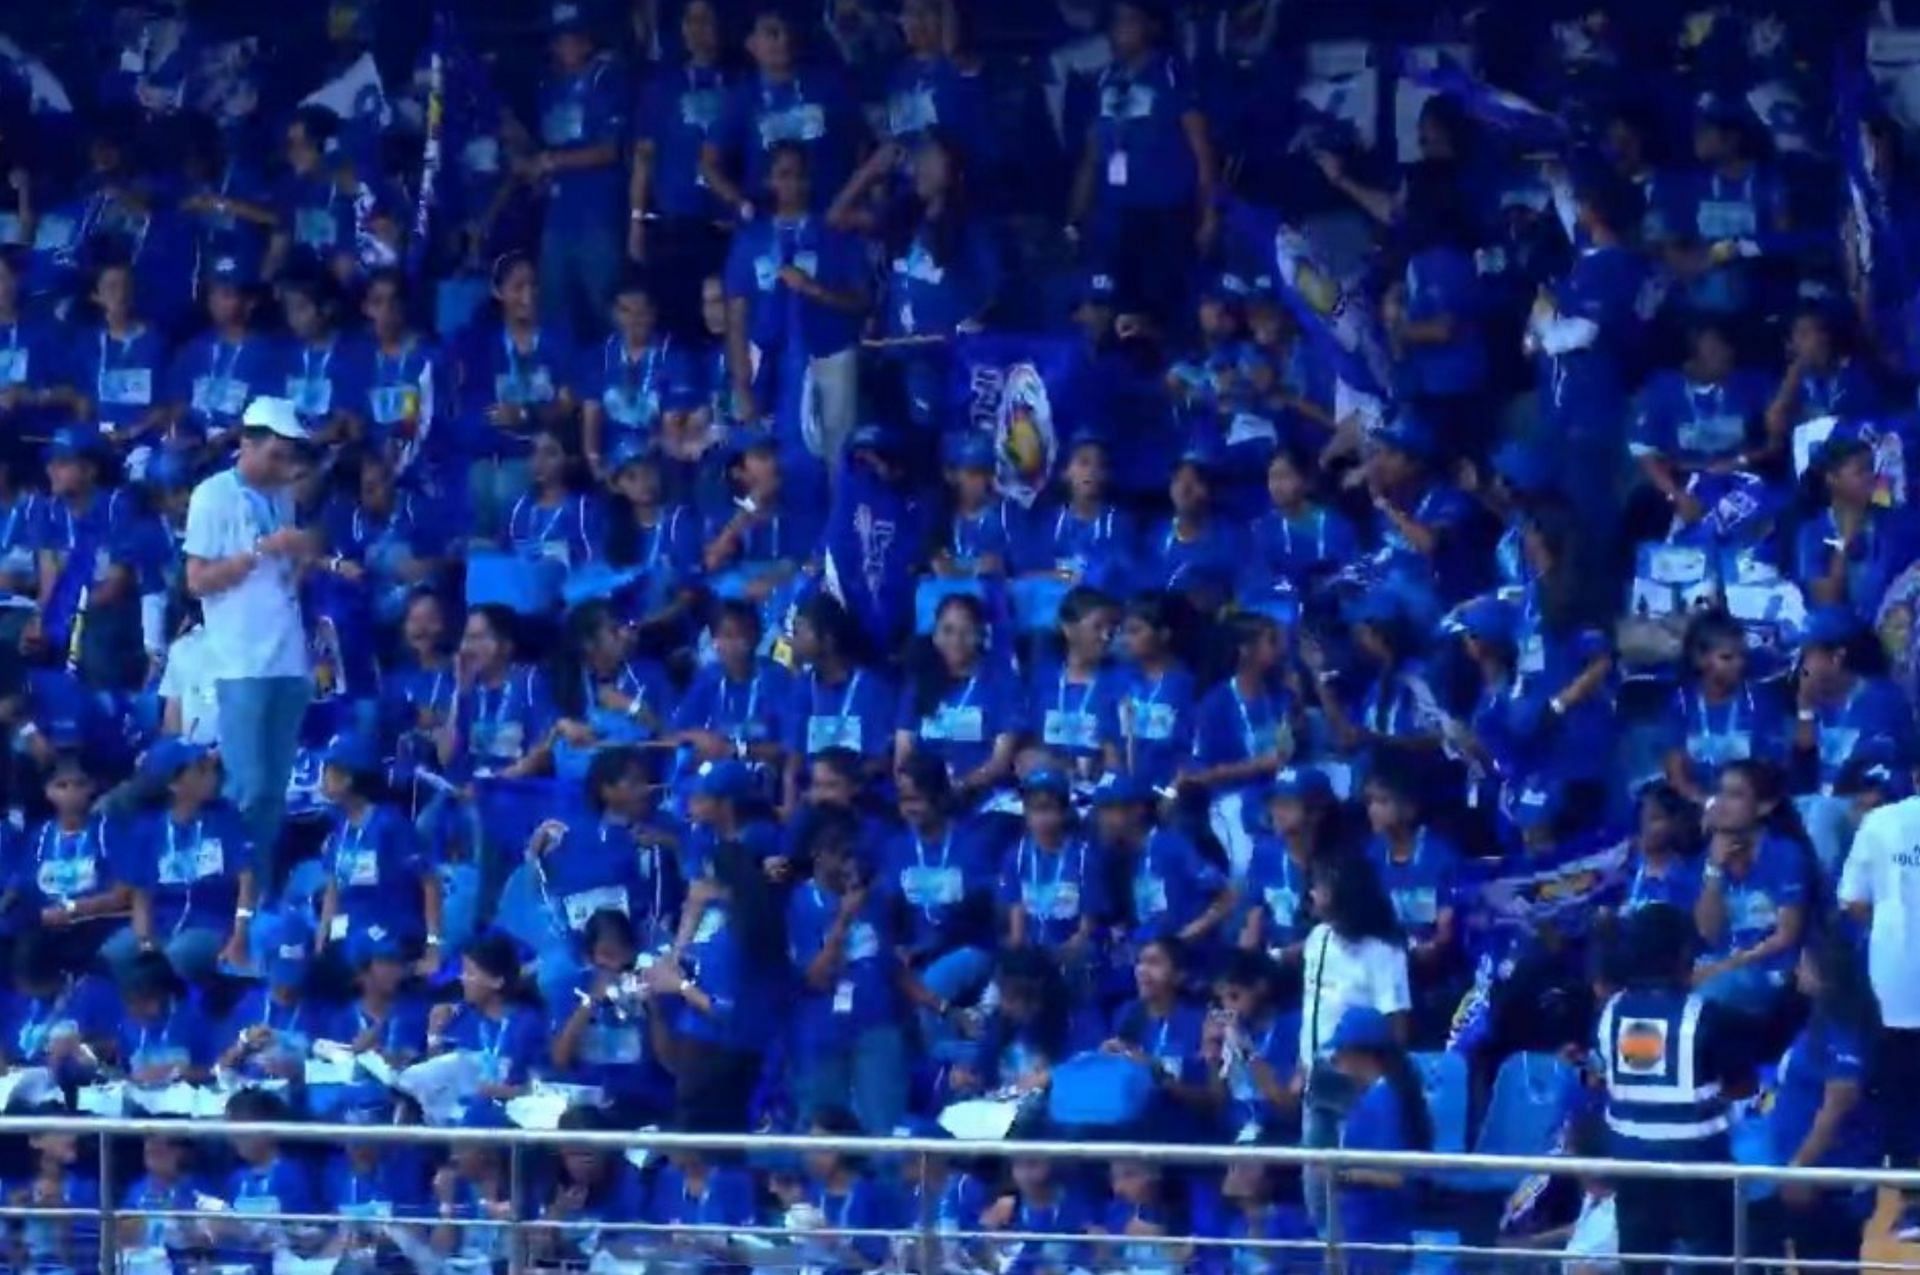 Young girls in attendance at the Wankhede Stadium for MI